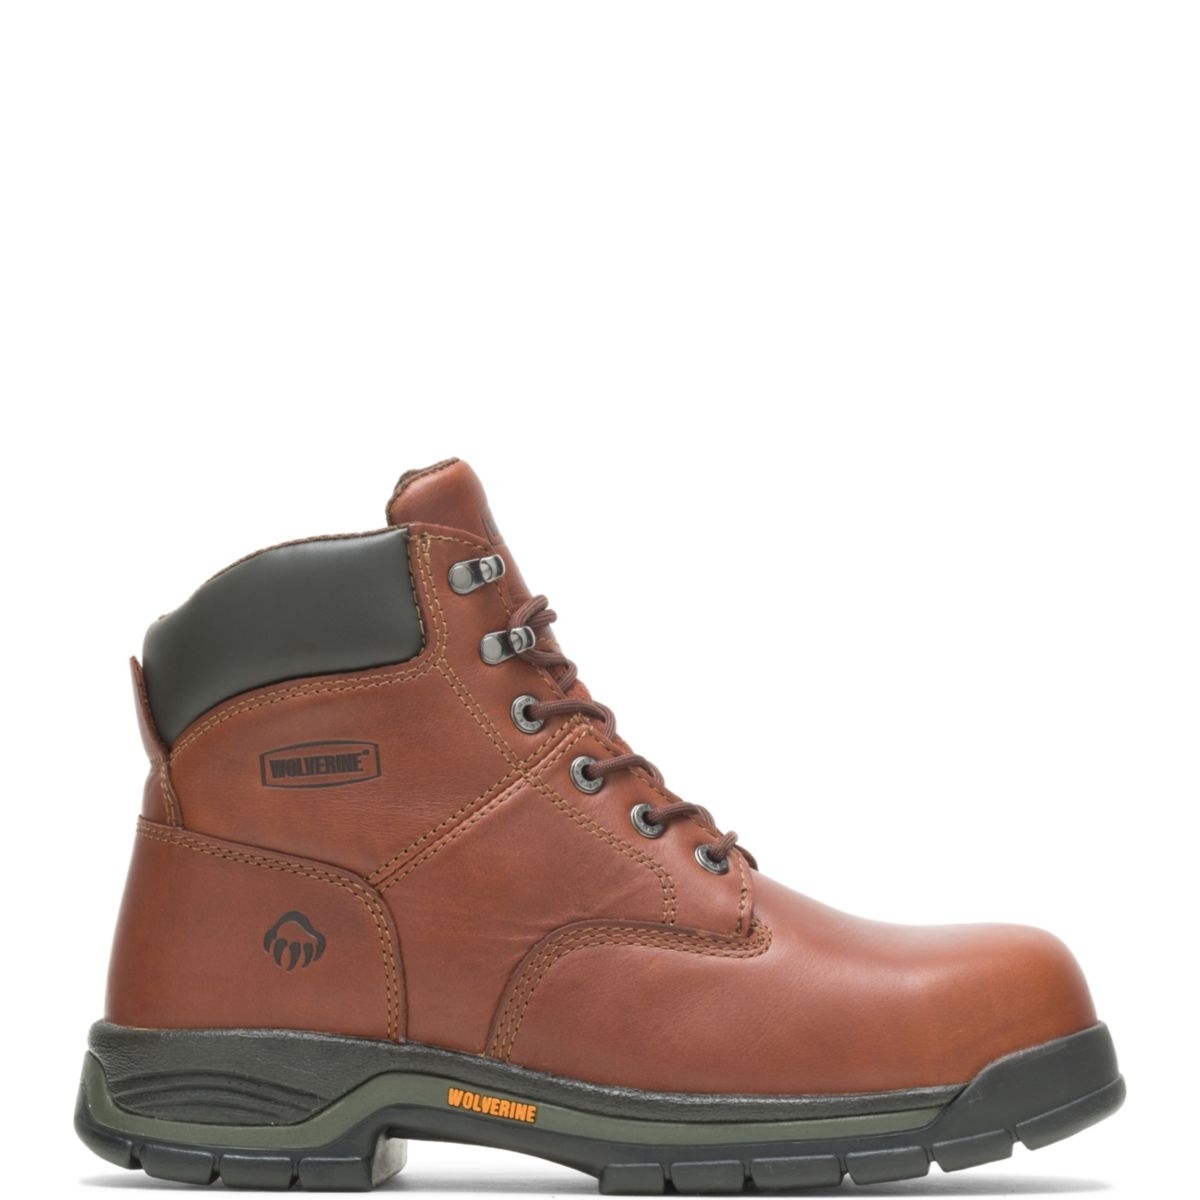 WOLVERINE Men's Harrison 6 Lace-Up SoftToe Work Boot Brown - W04906 Varies BROWN - BROWN, 10.5 XX-Wide